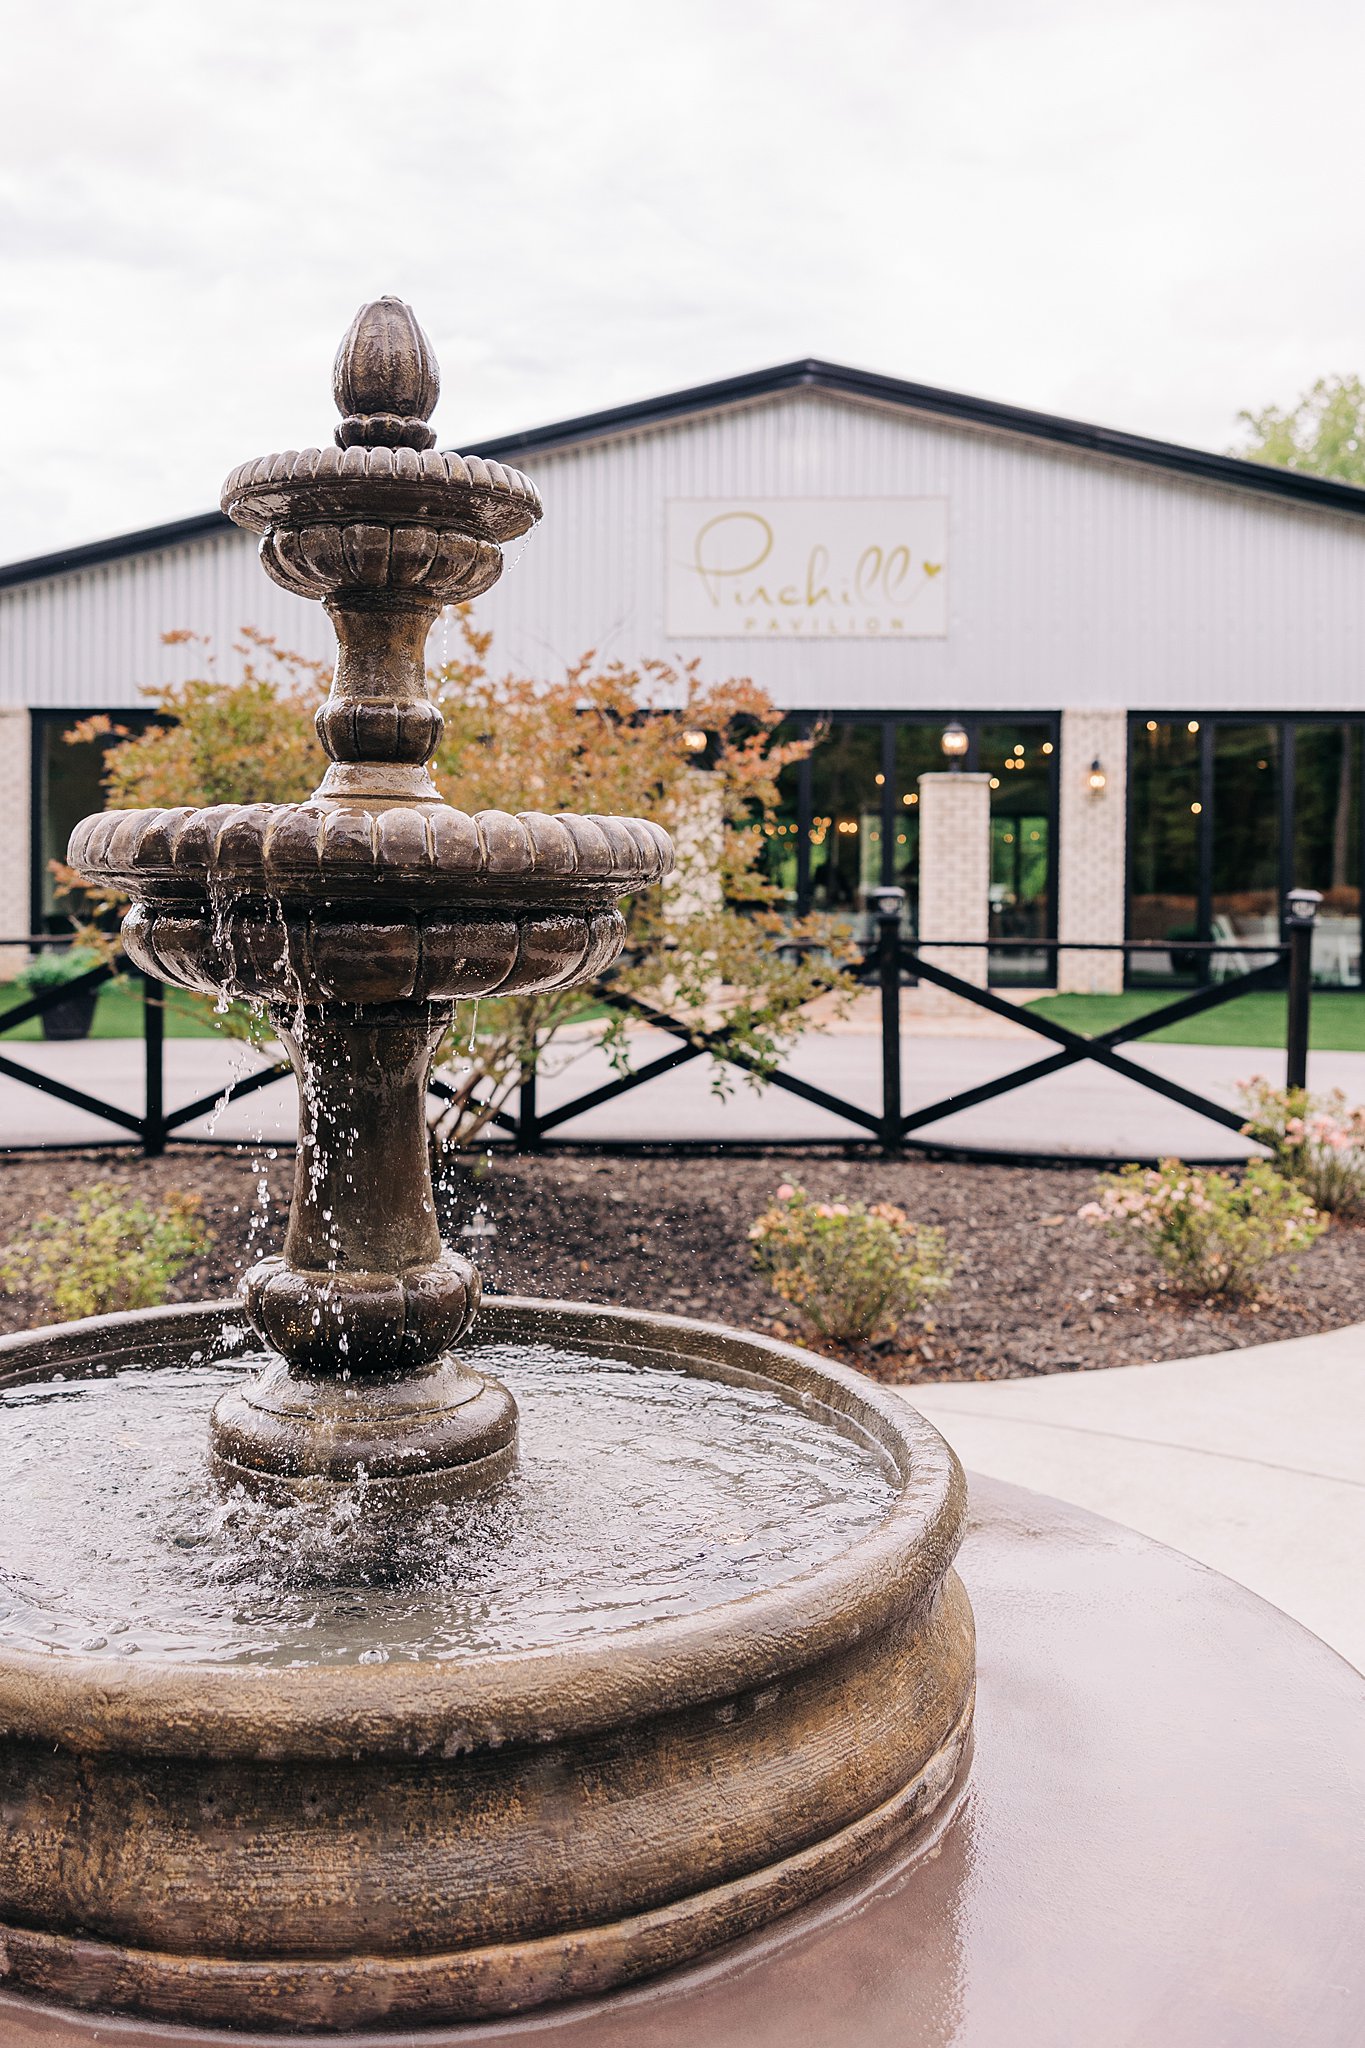 Details of the front entrance and fountain at the pinehill pavilion wedding venue